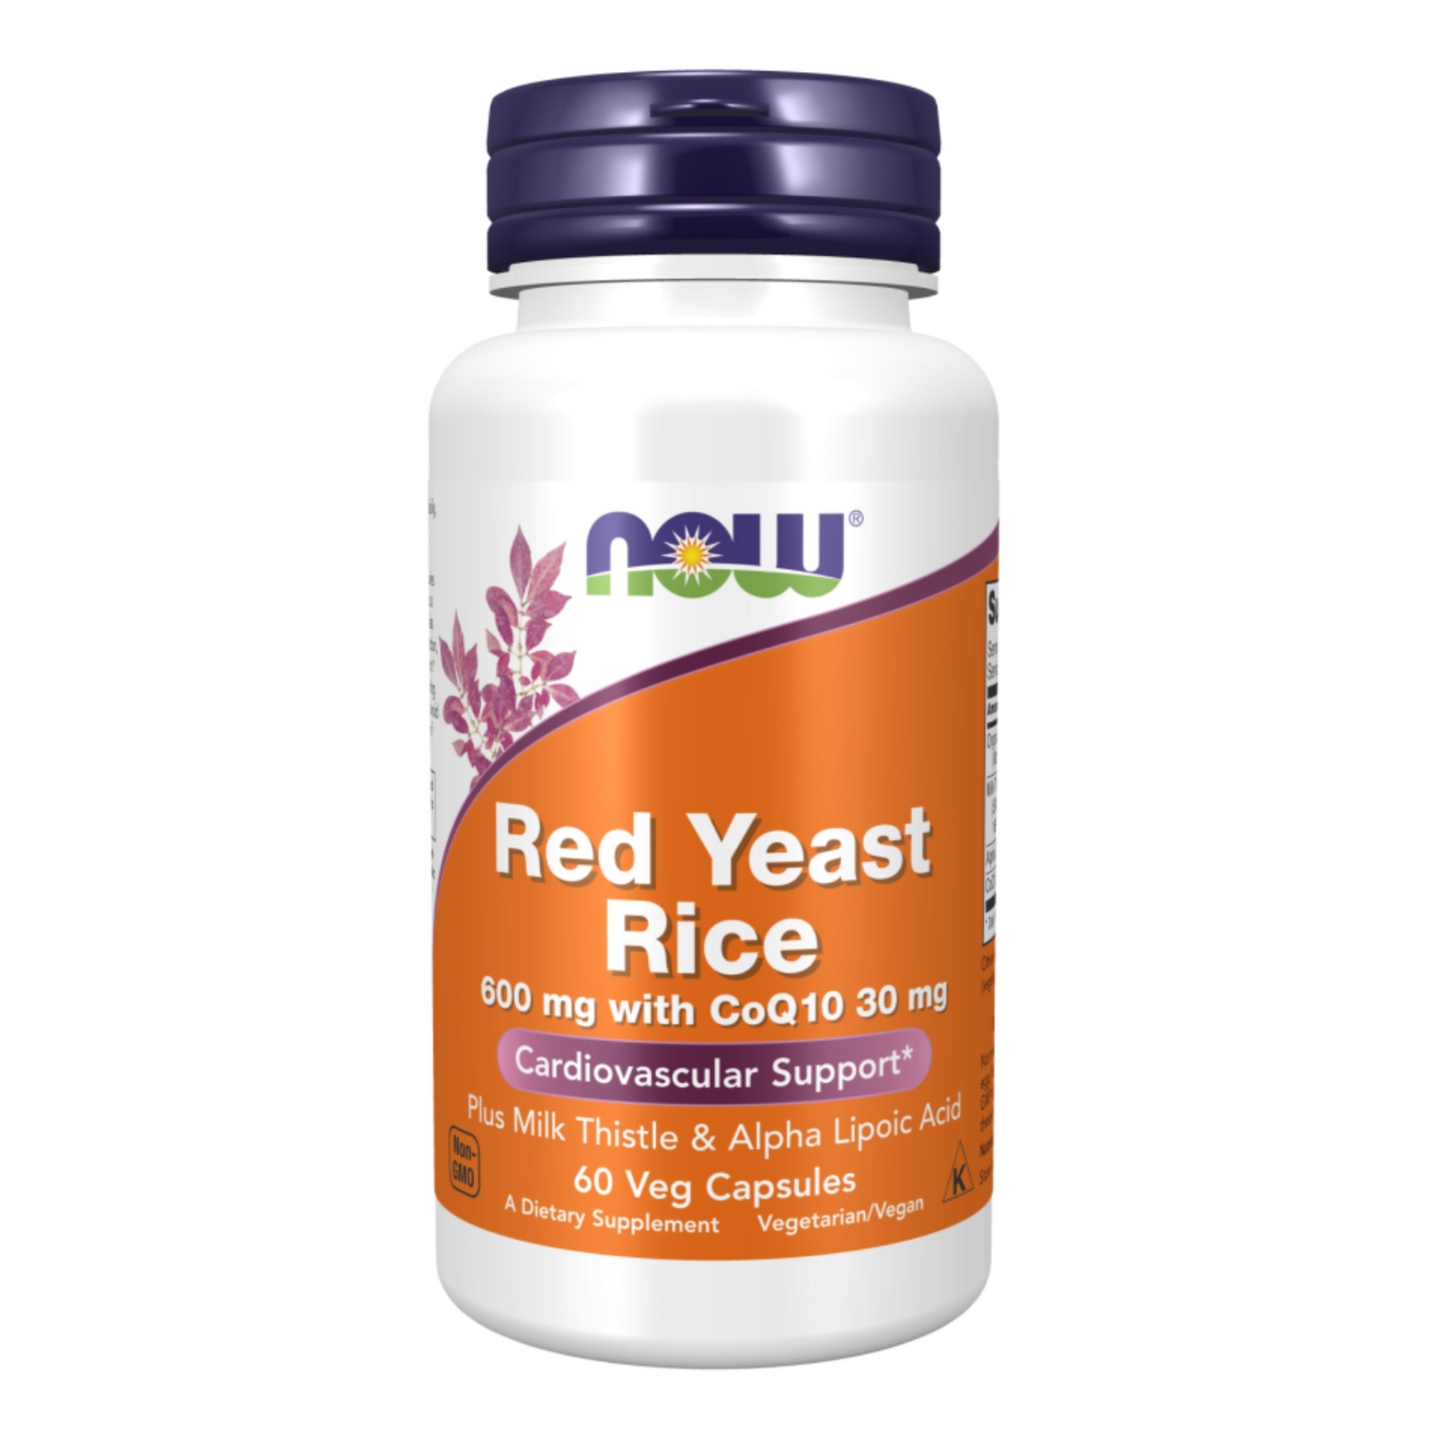 Red Yeast Rice 600mg with CoQ10